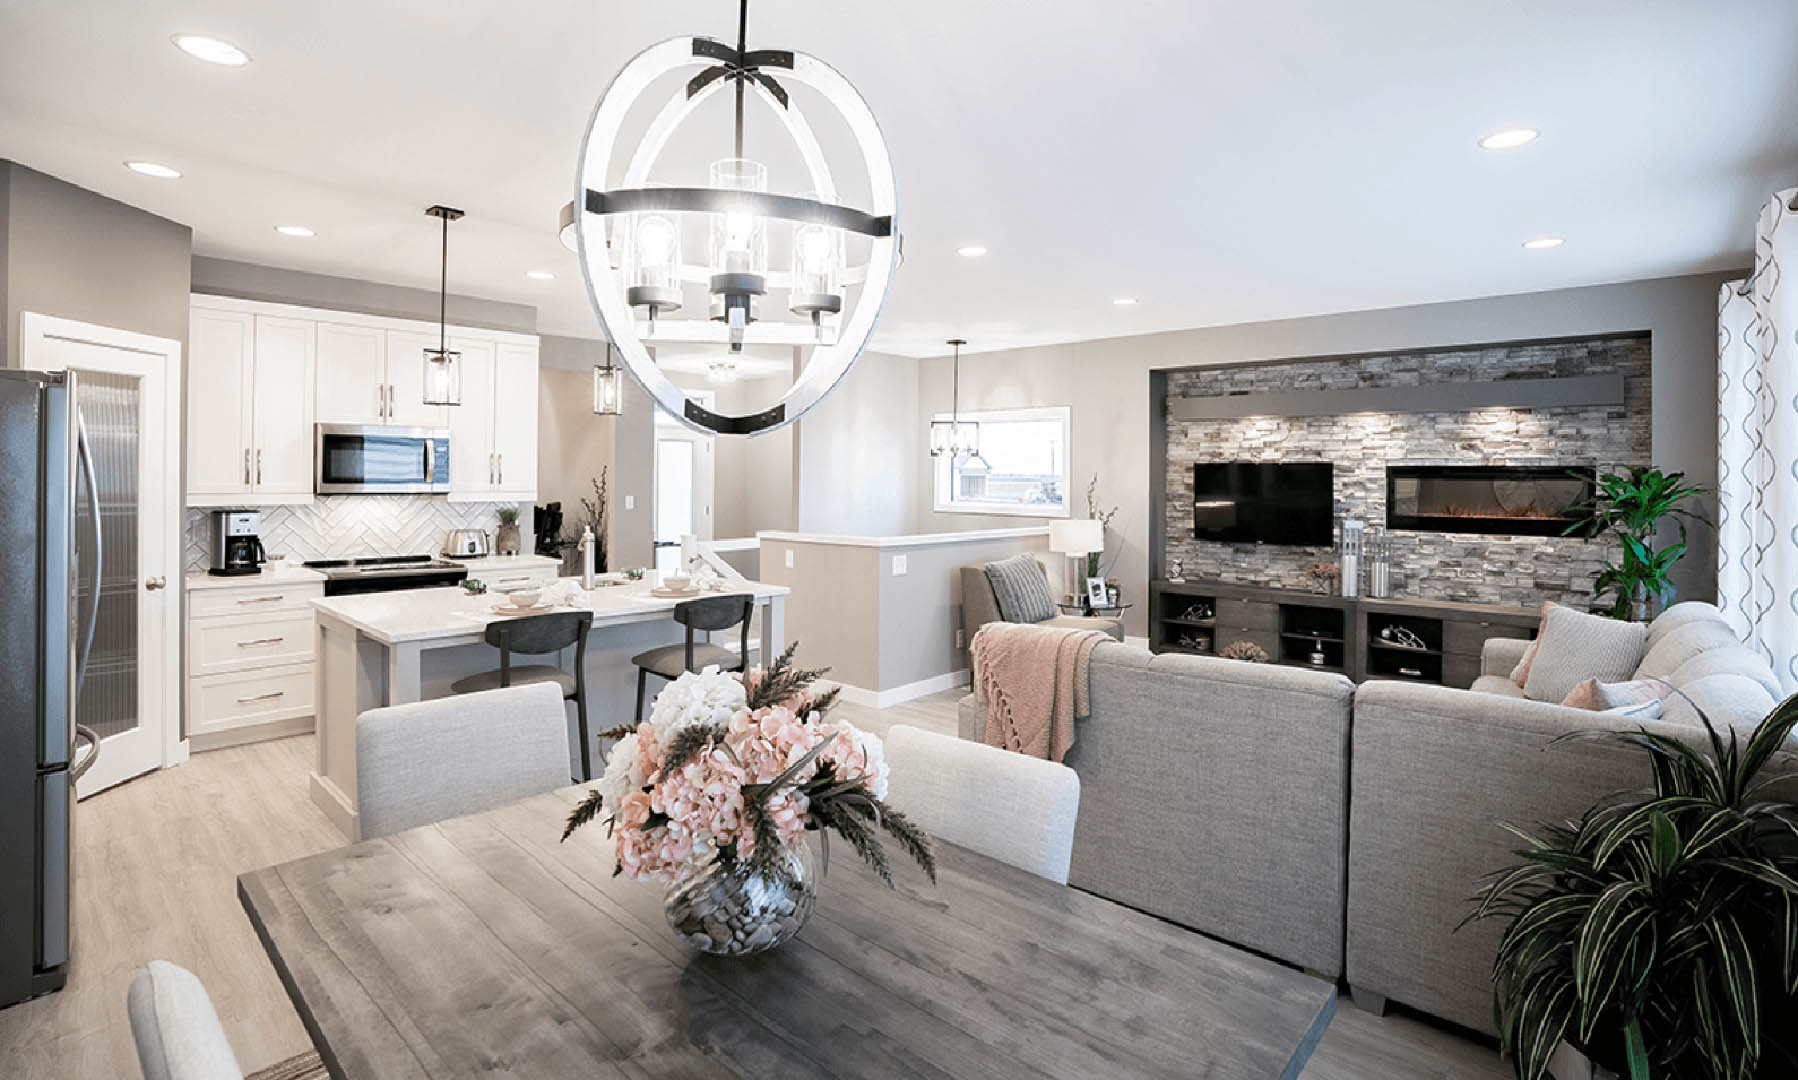 New Community: Grand Opening Event in Grande Pointe Meadows! Main Floor Image